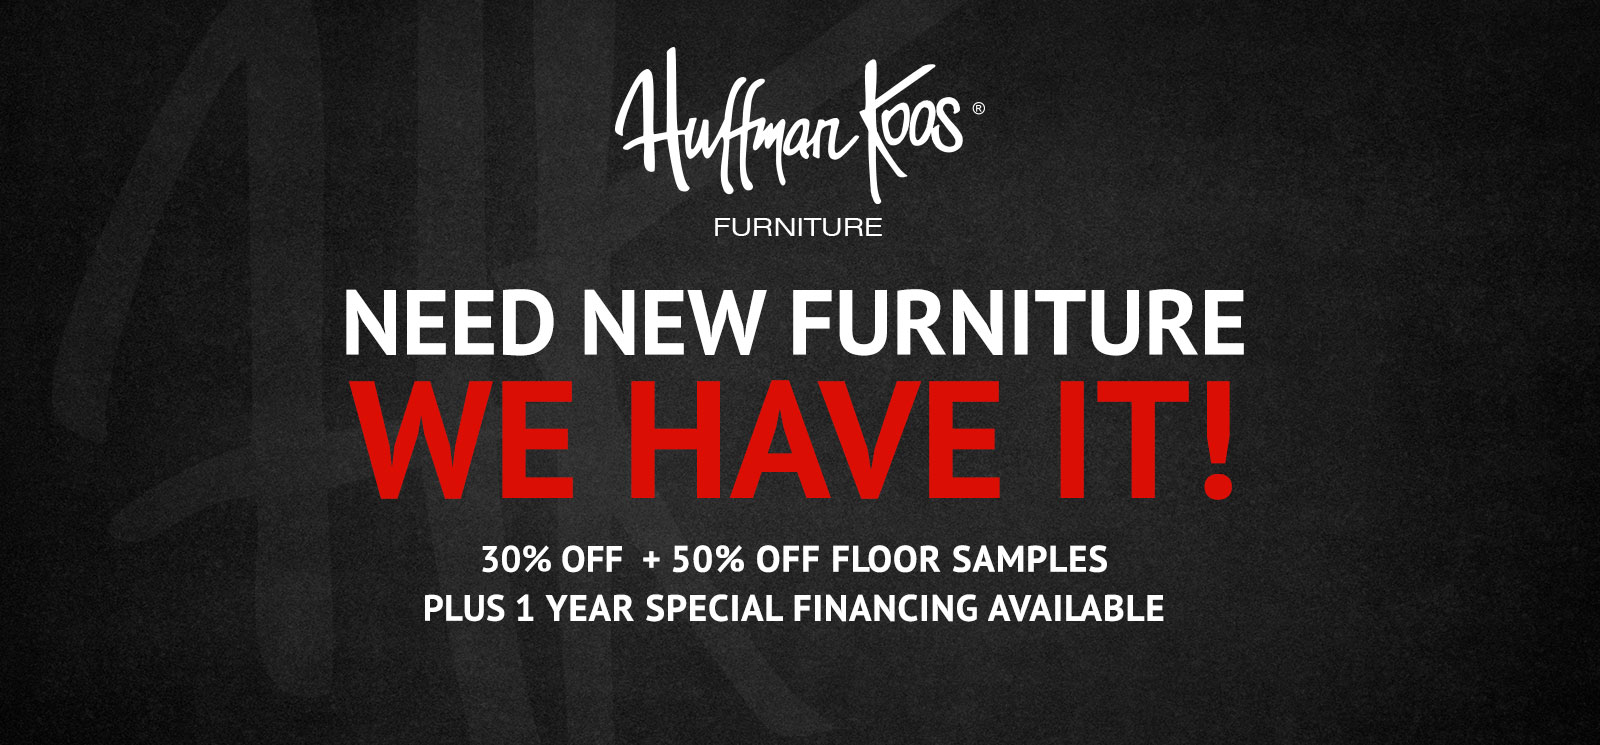 Need new furniture we have it! shop now